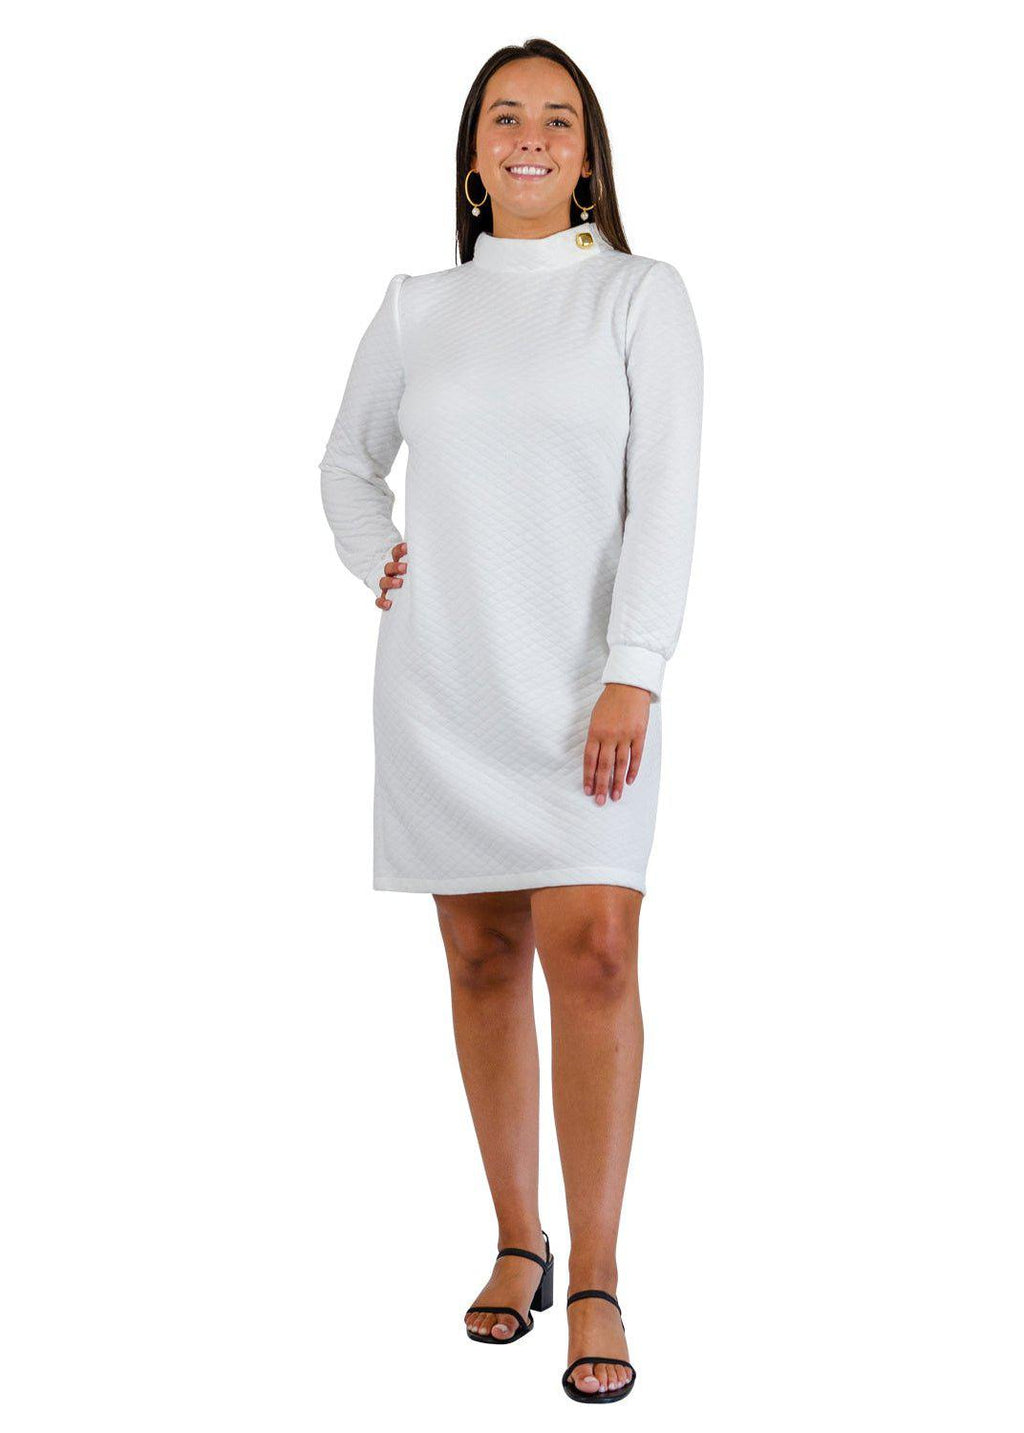 Camilla Dress - White Quilted Knit